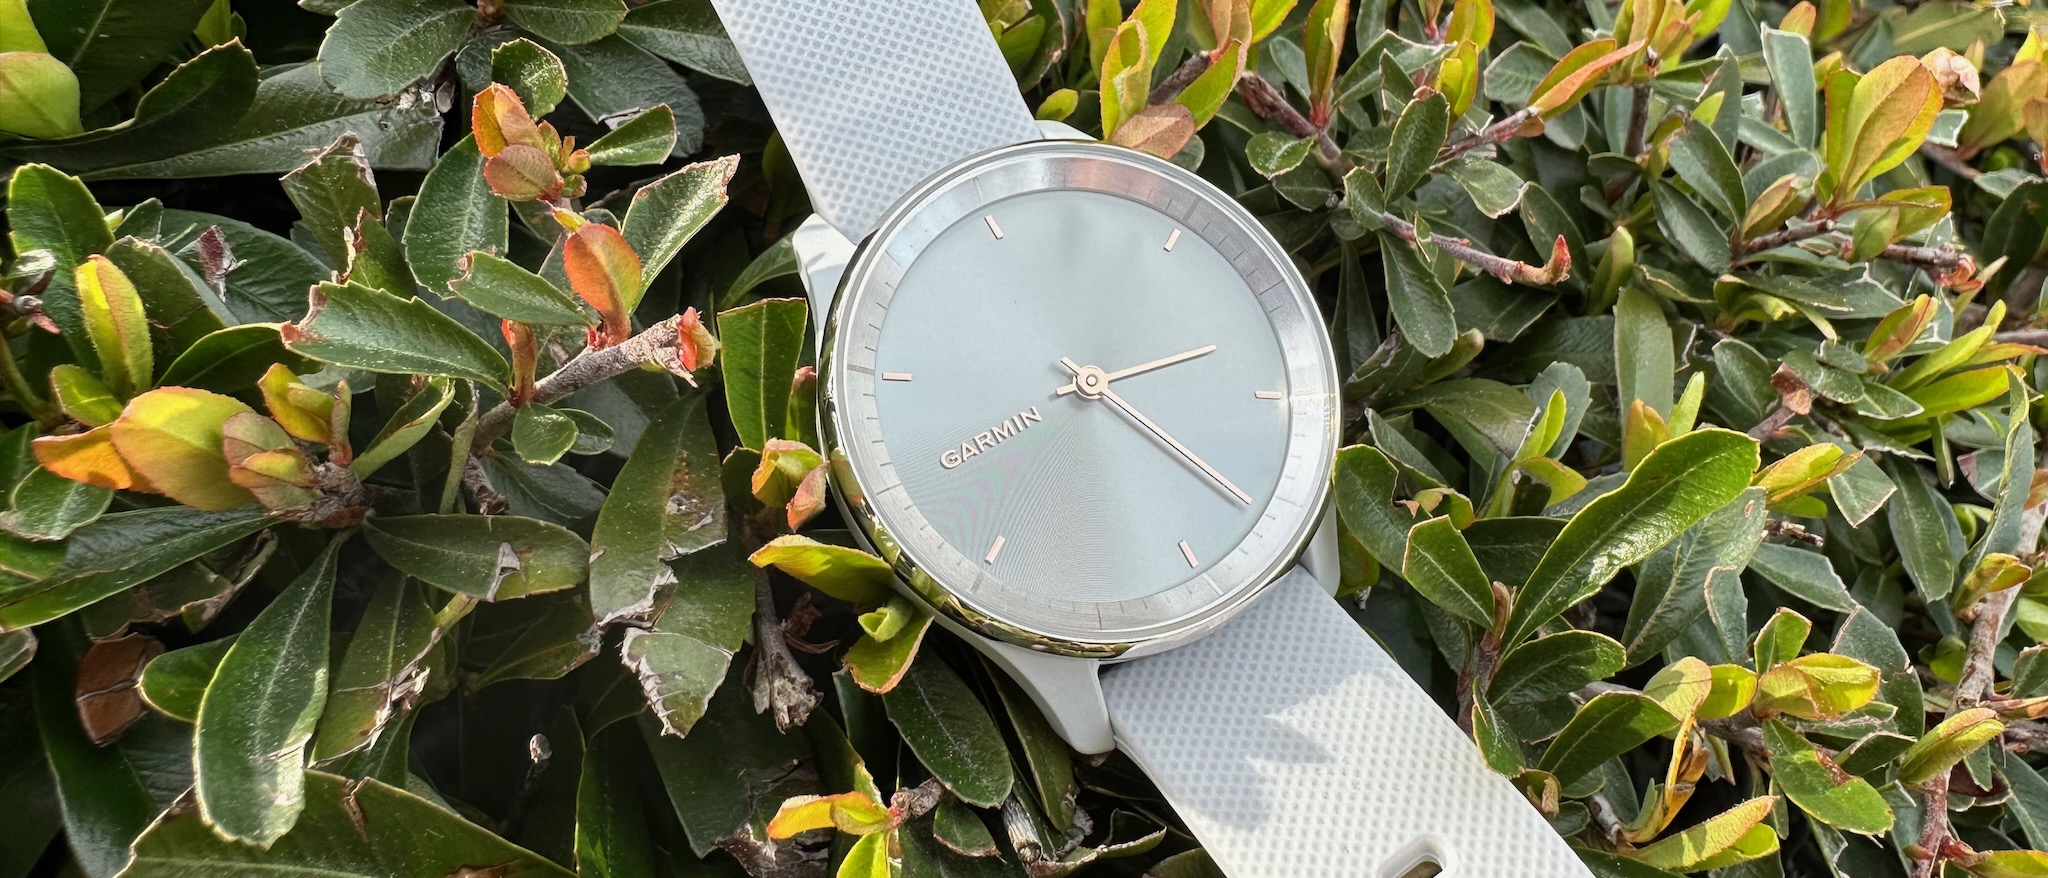 Garmin Vivomove review: The fitness watch you can wear to a wedding - CNET